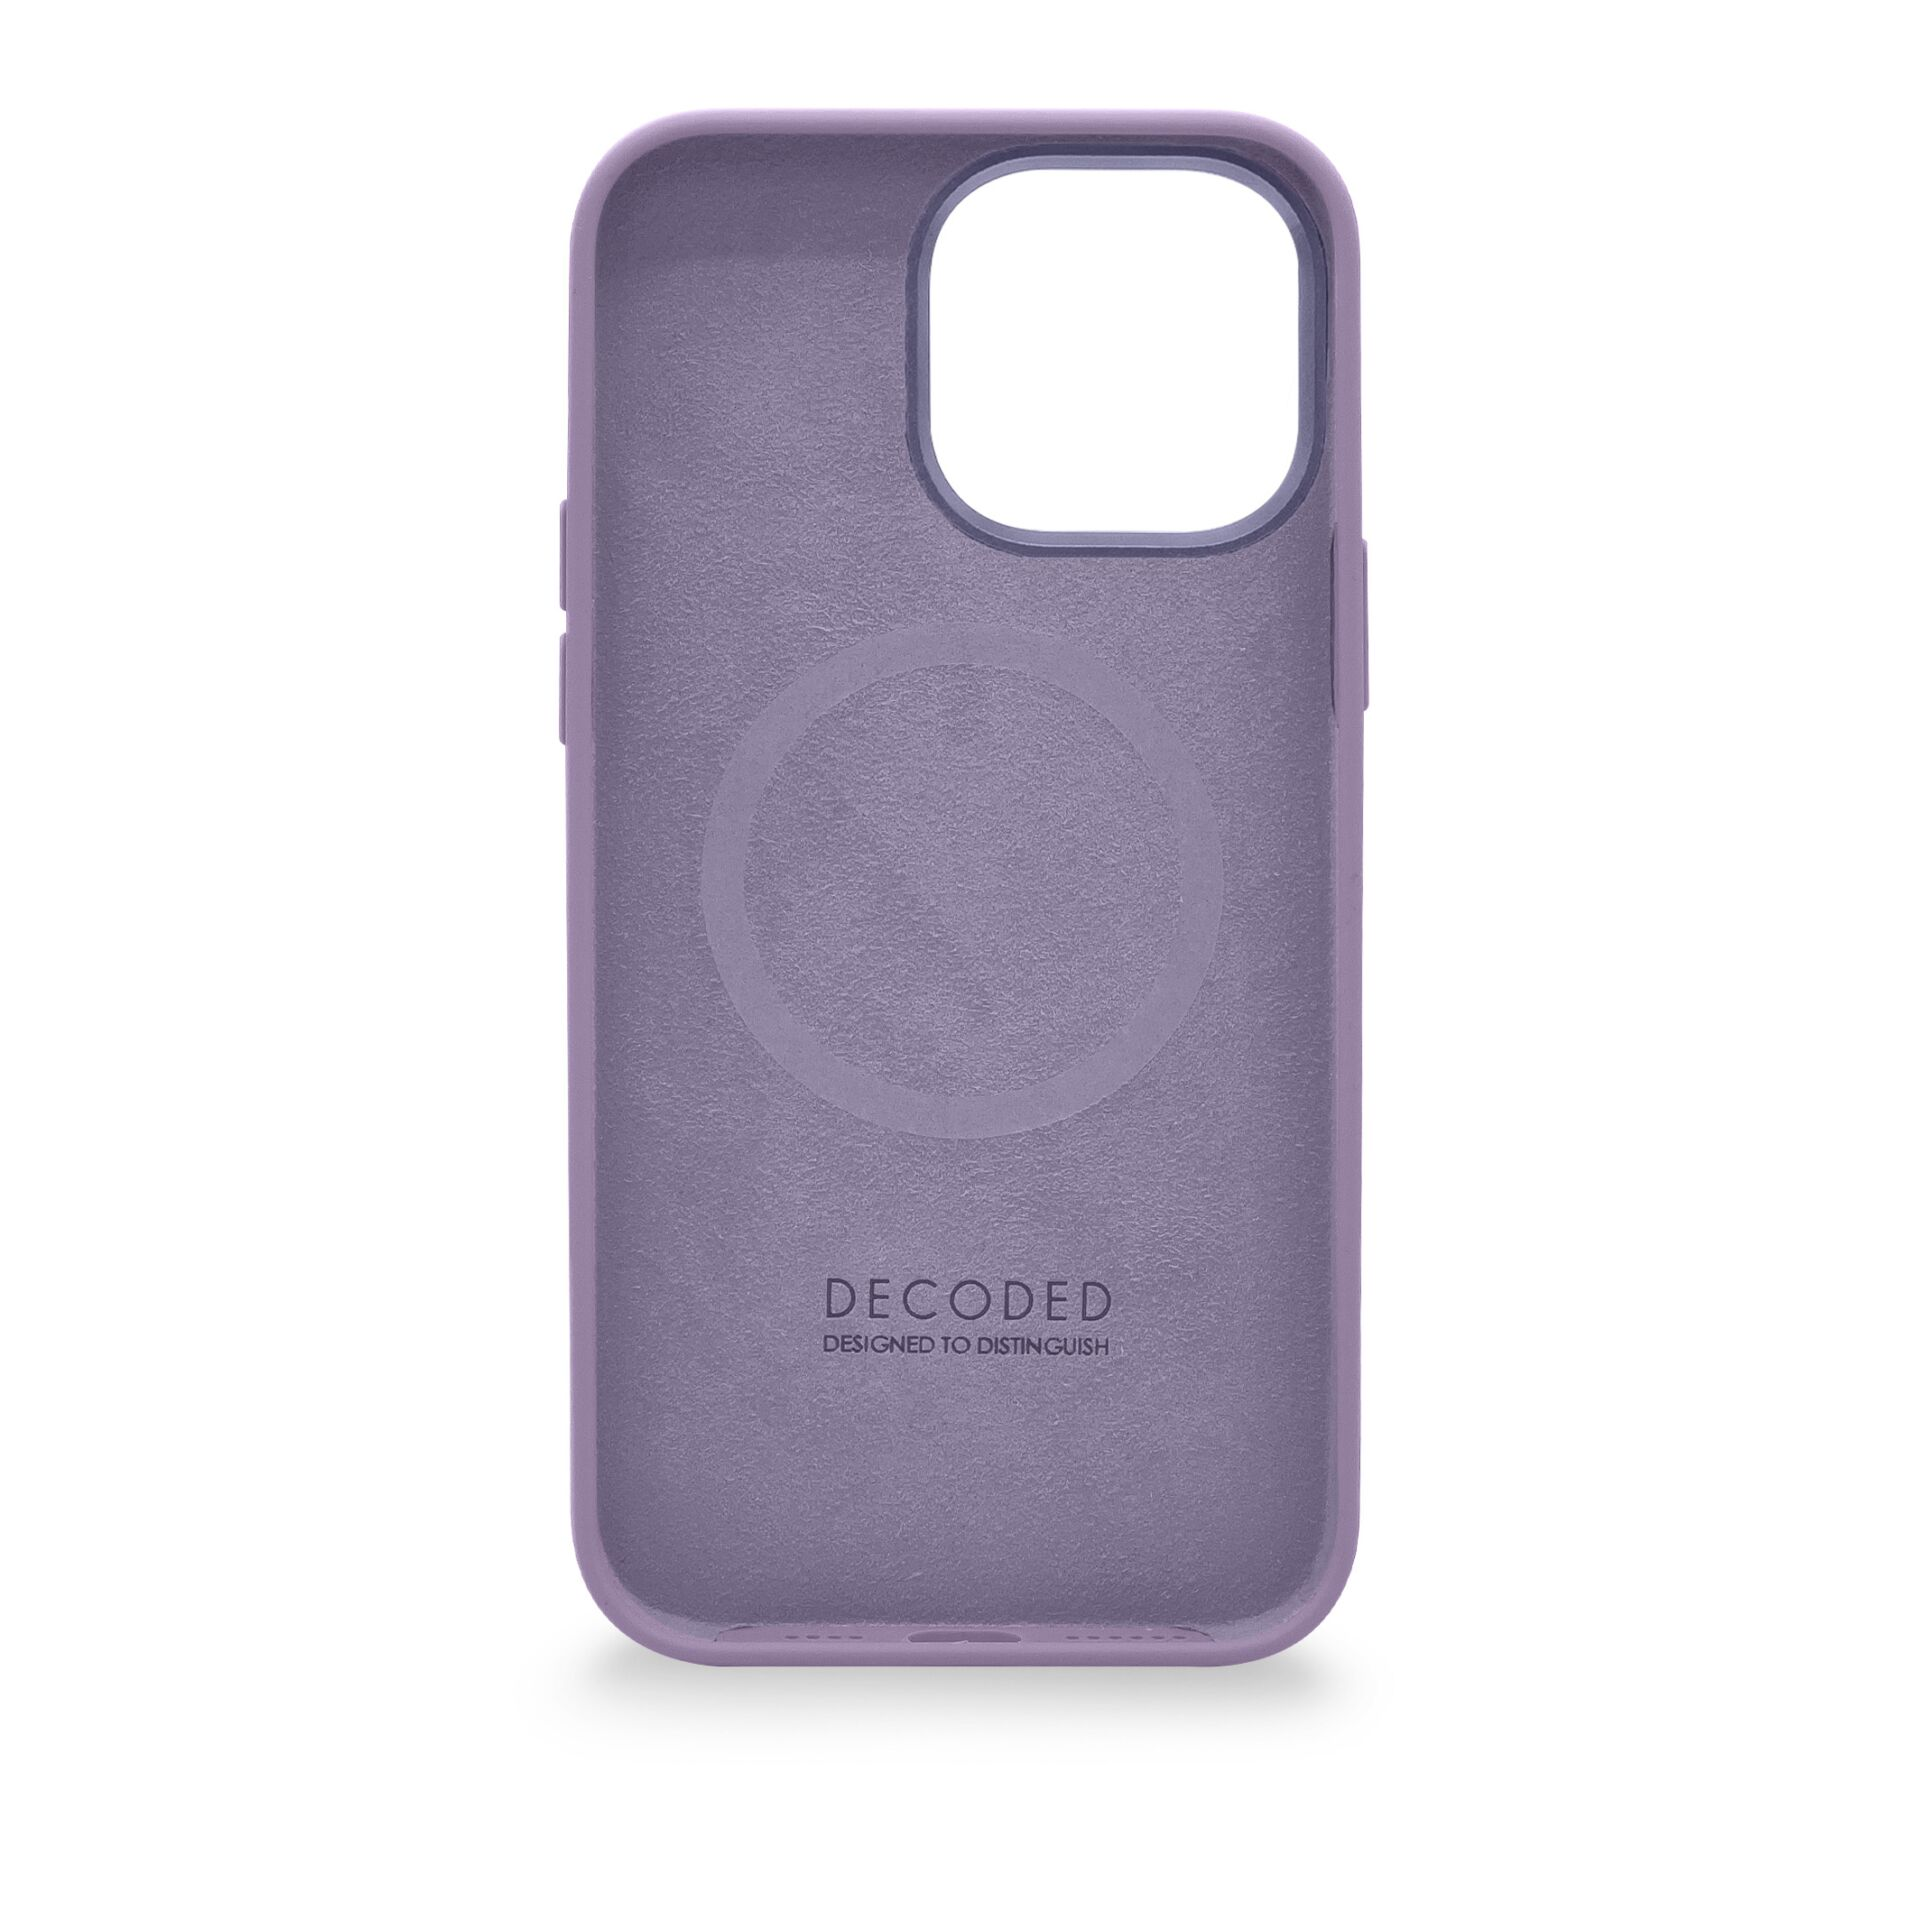 Apple, Silicone 14 Backcover, AntiMicrobial Backcover Lavender, Pro, iPhone DECODED Lavender